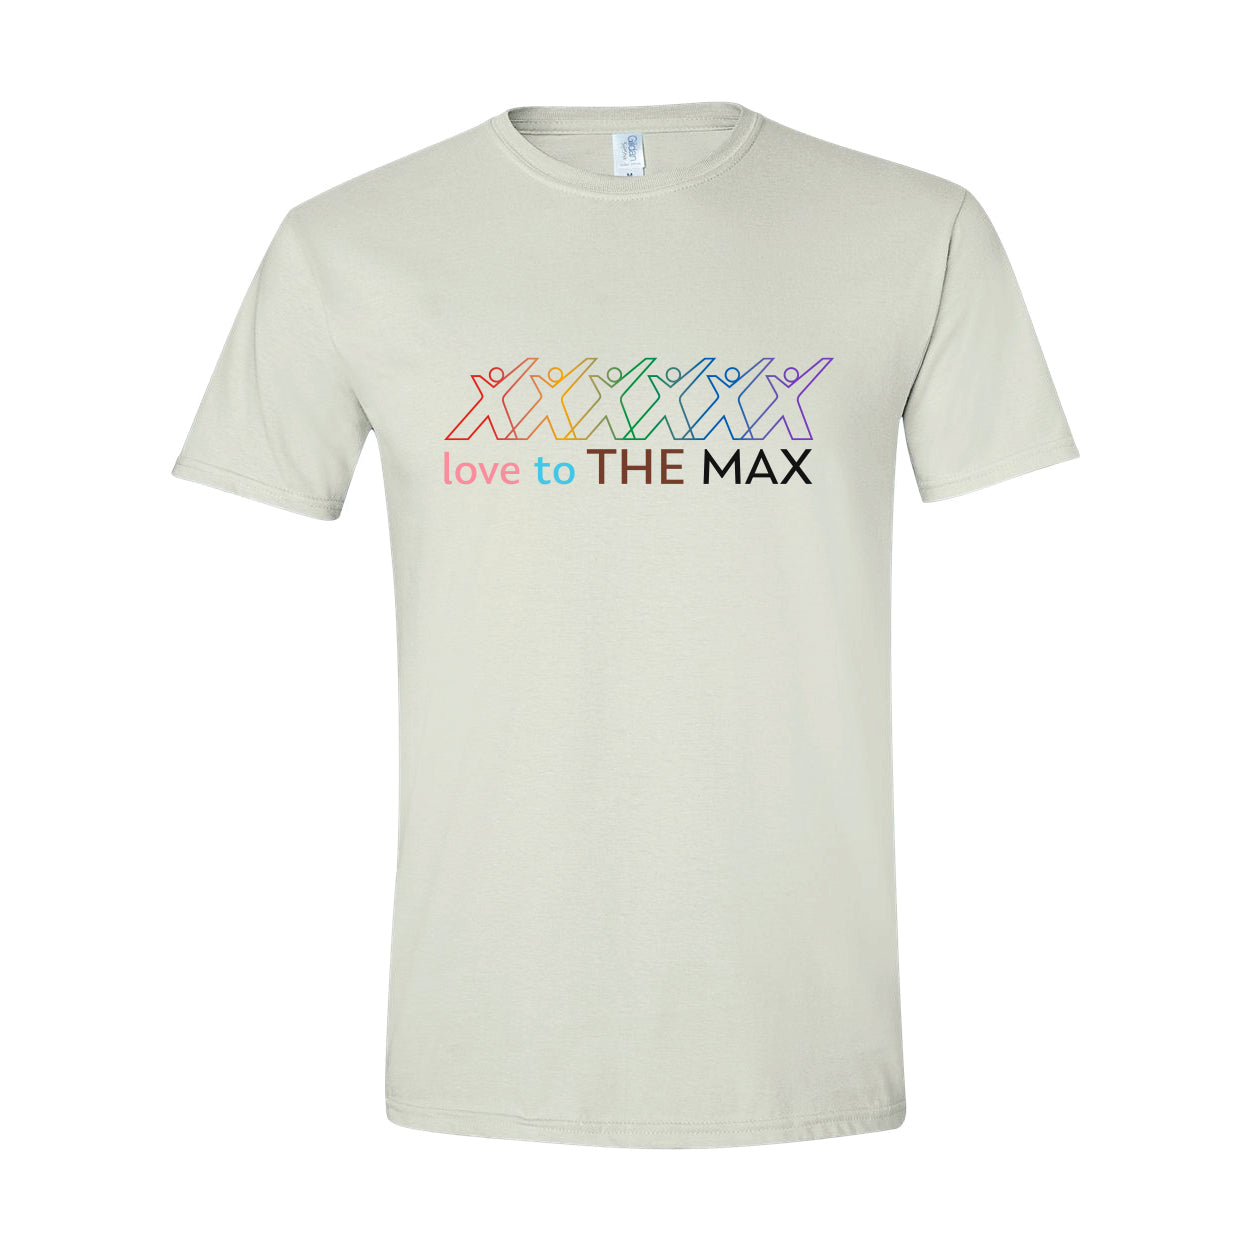 Unisex "Love to THE MAX" Tee